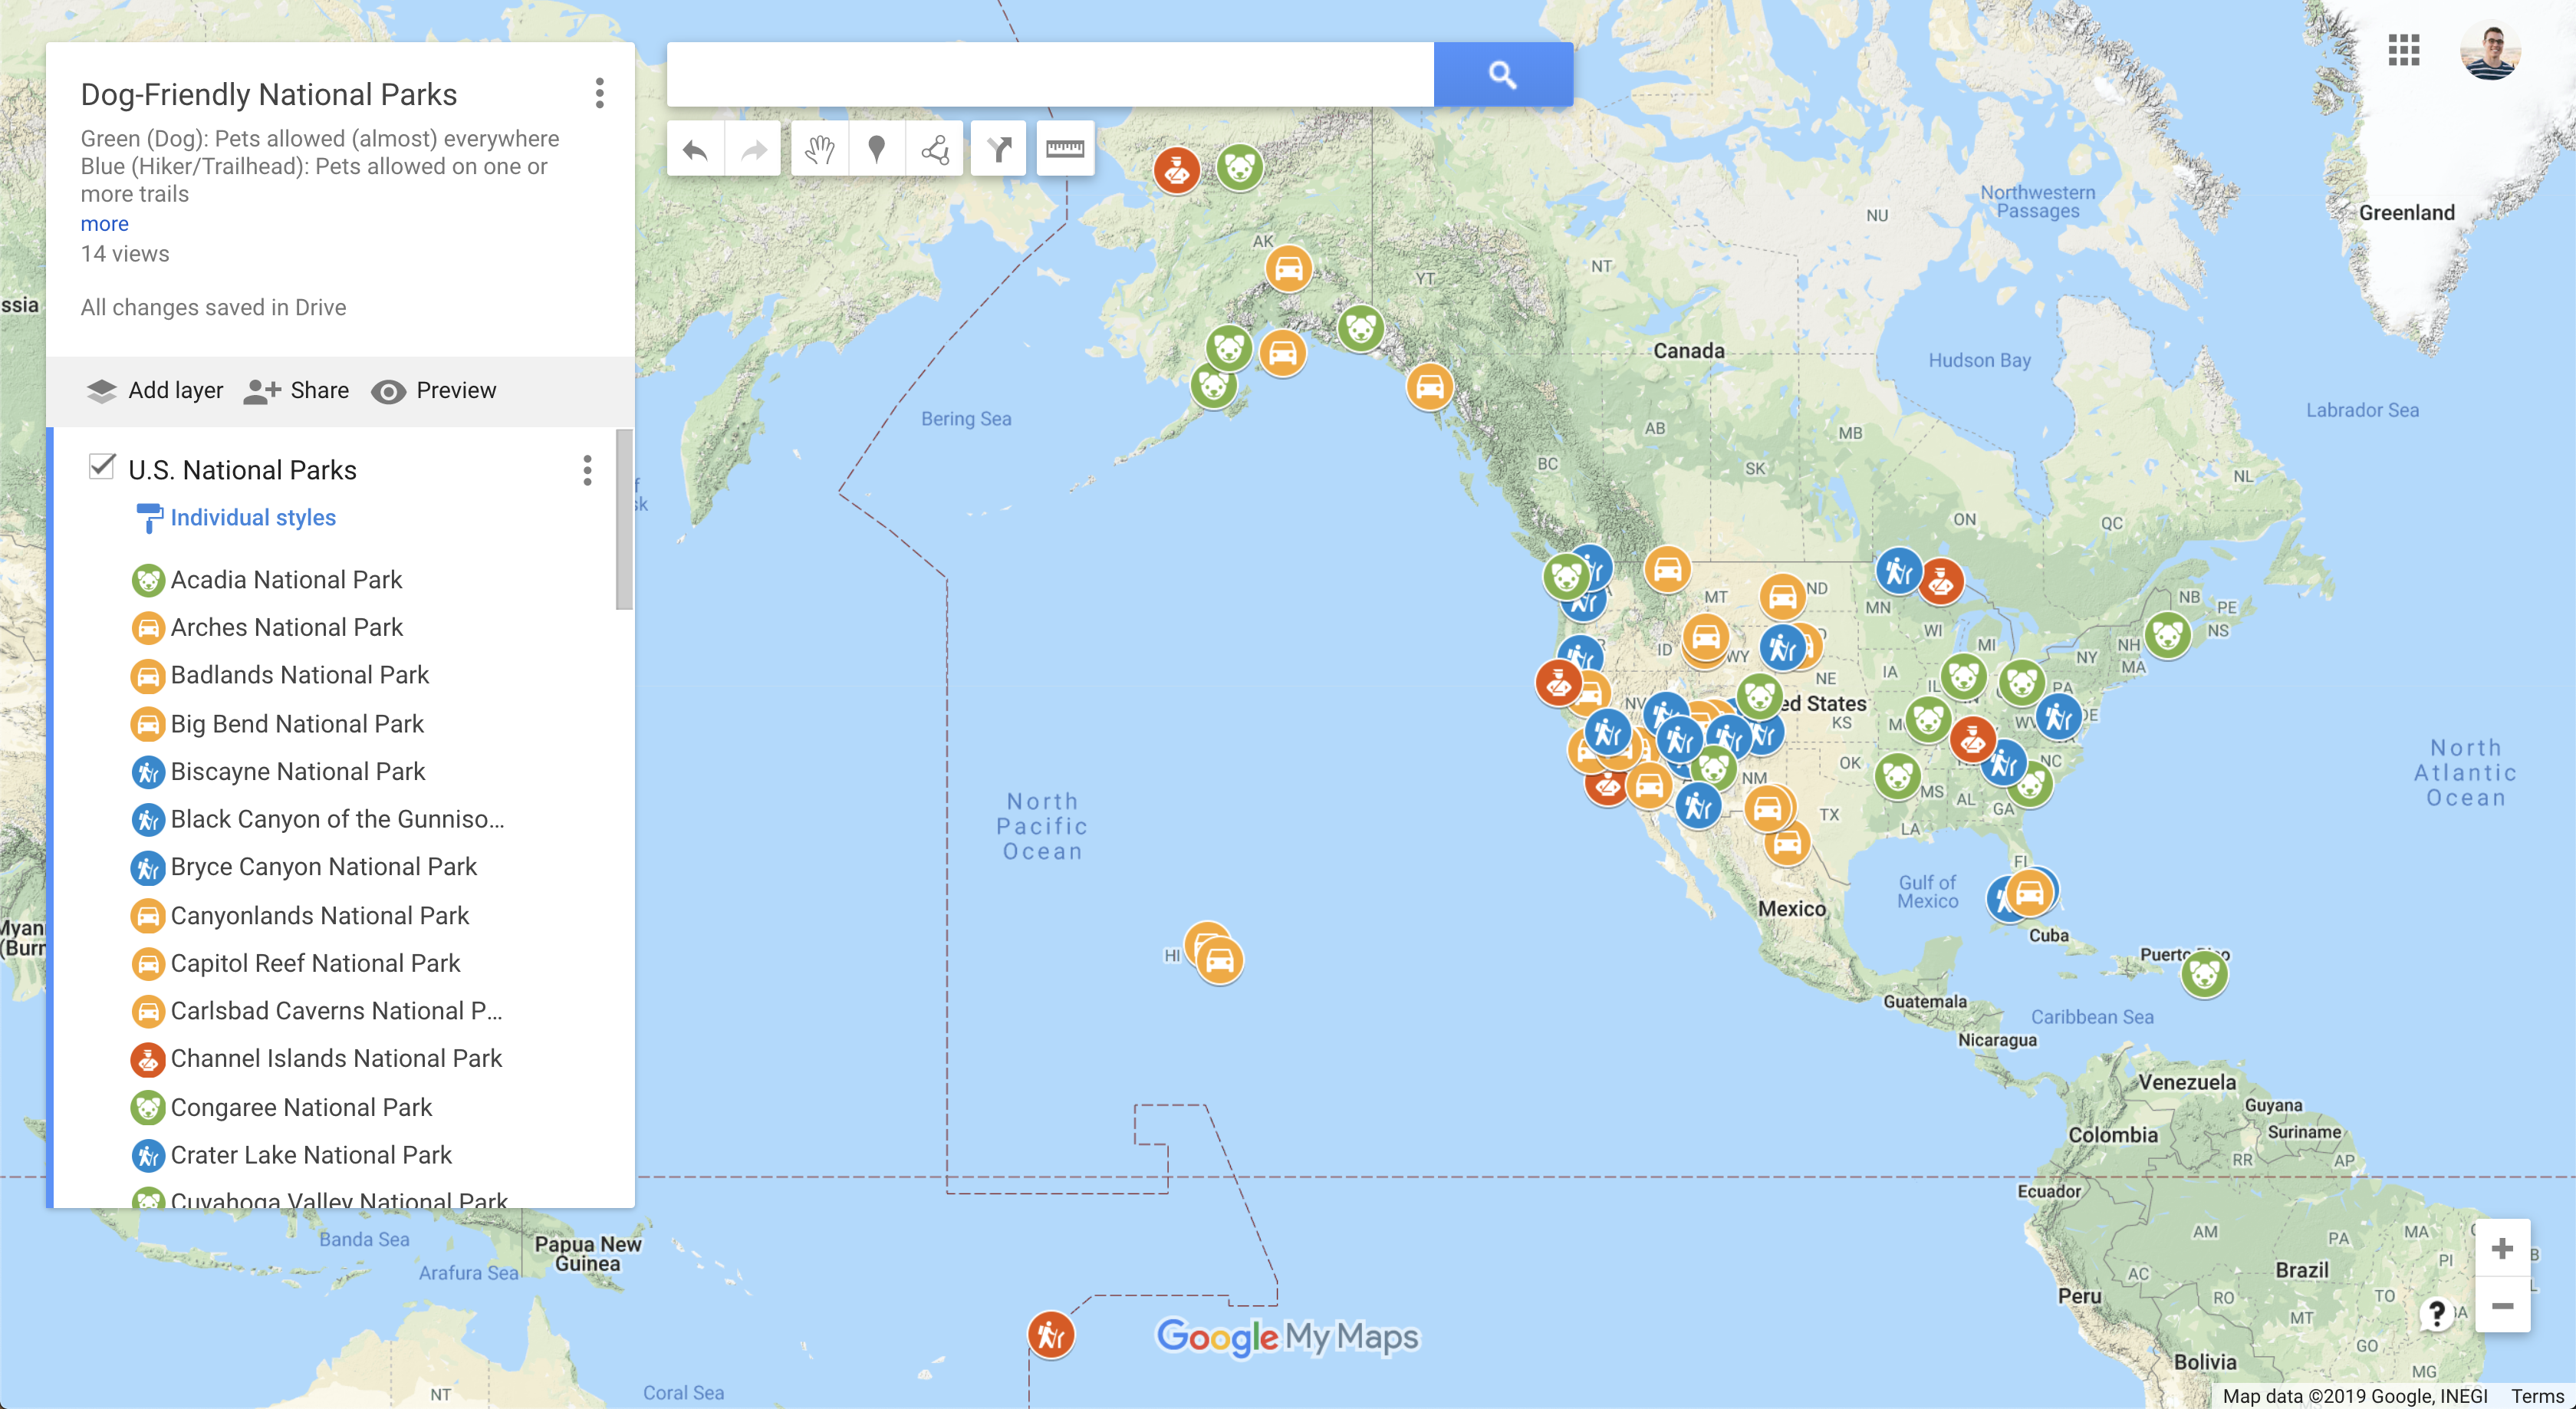 Dog-Friendly National Parks Map